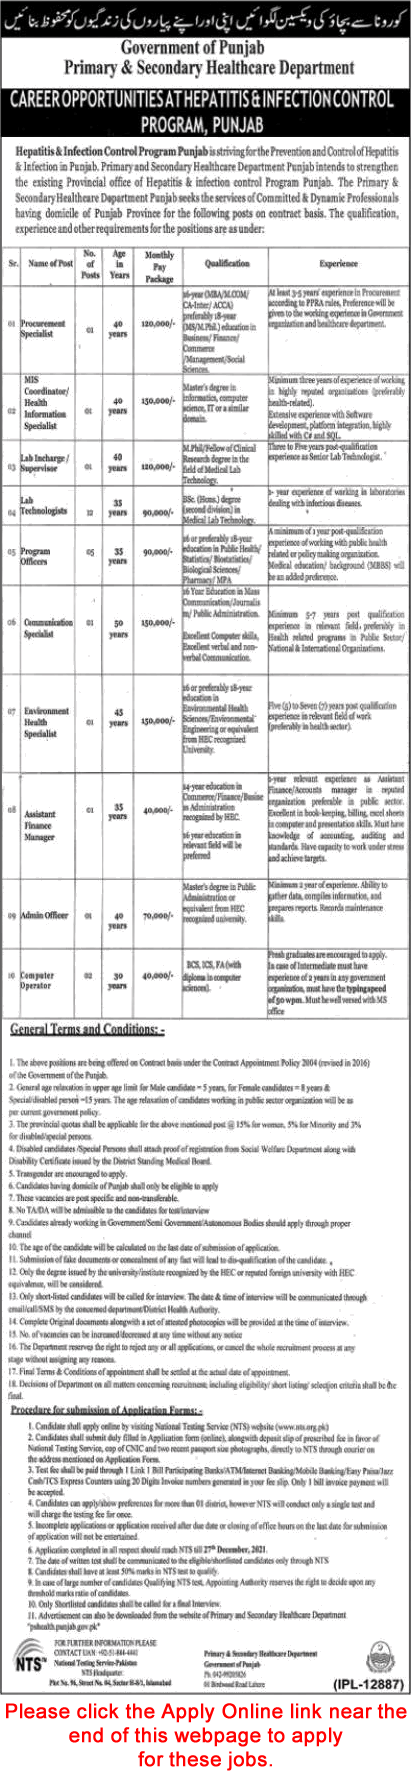 Primary and Secondary Healthcare Department Punjab Jobs December 2021 NTS Apply Online Latest